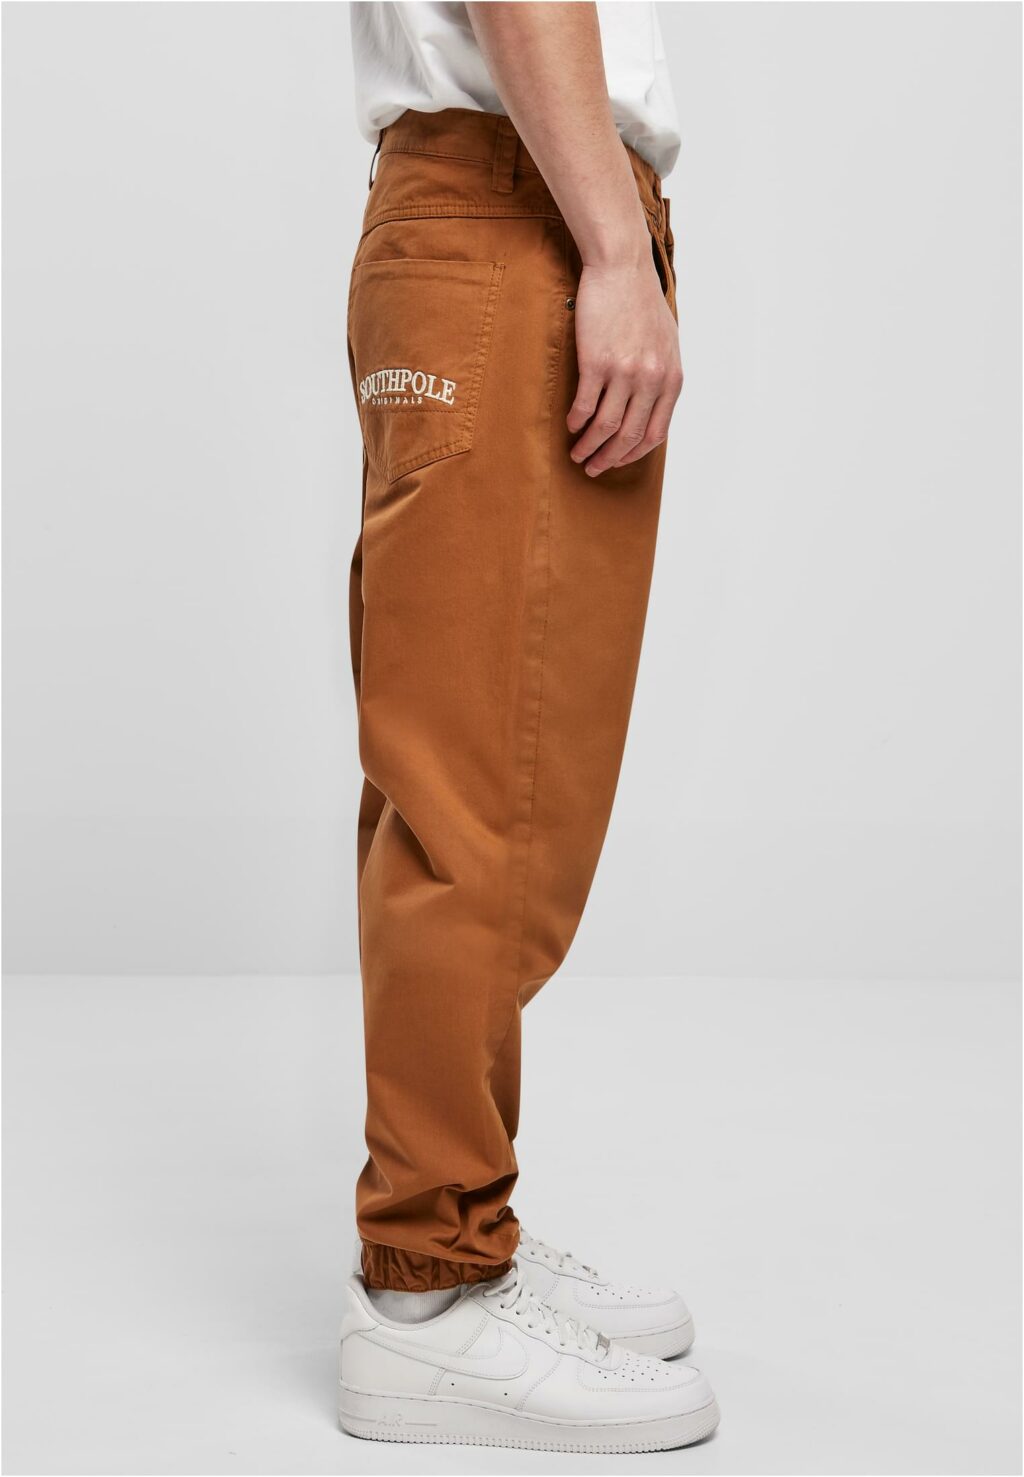 Southpole Script Twill Pants toffee SP208